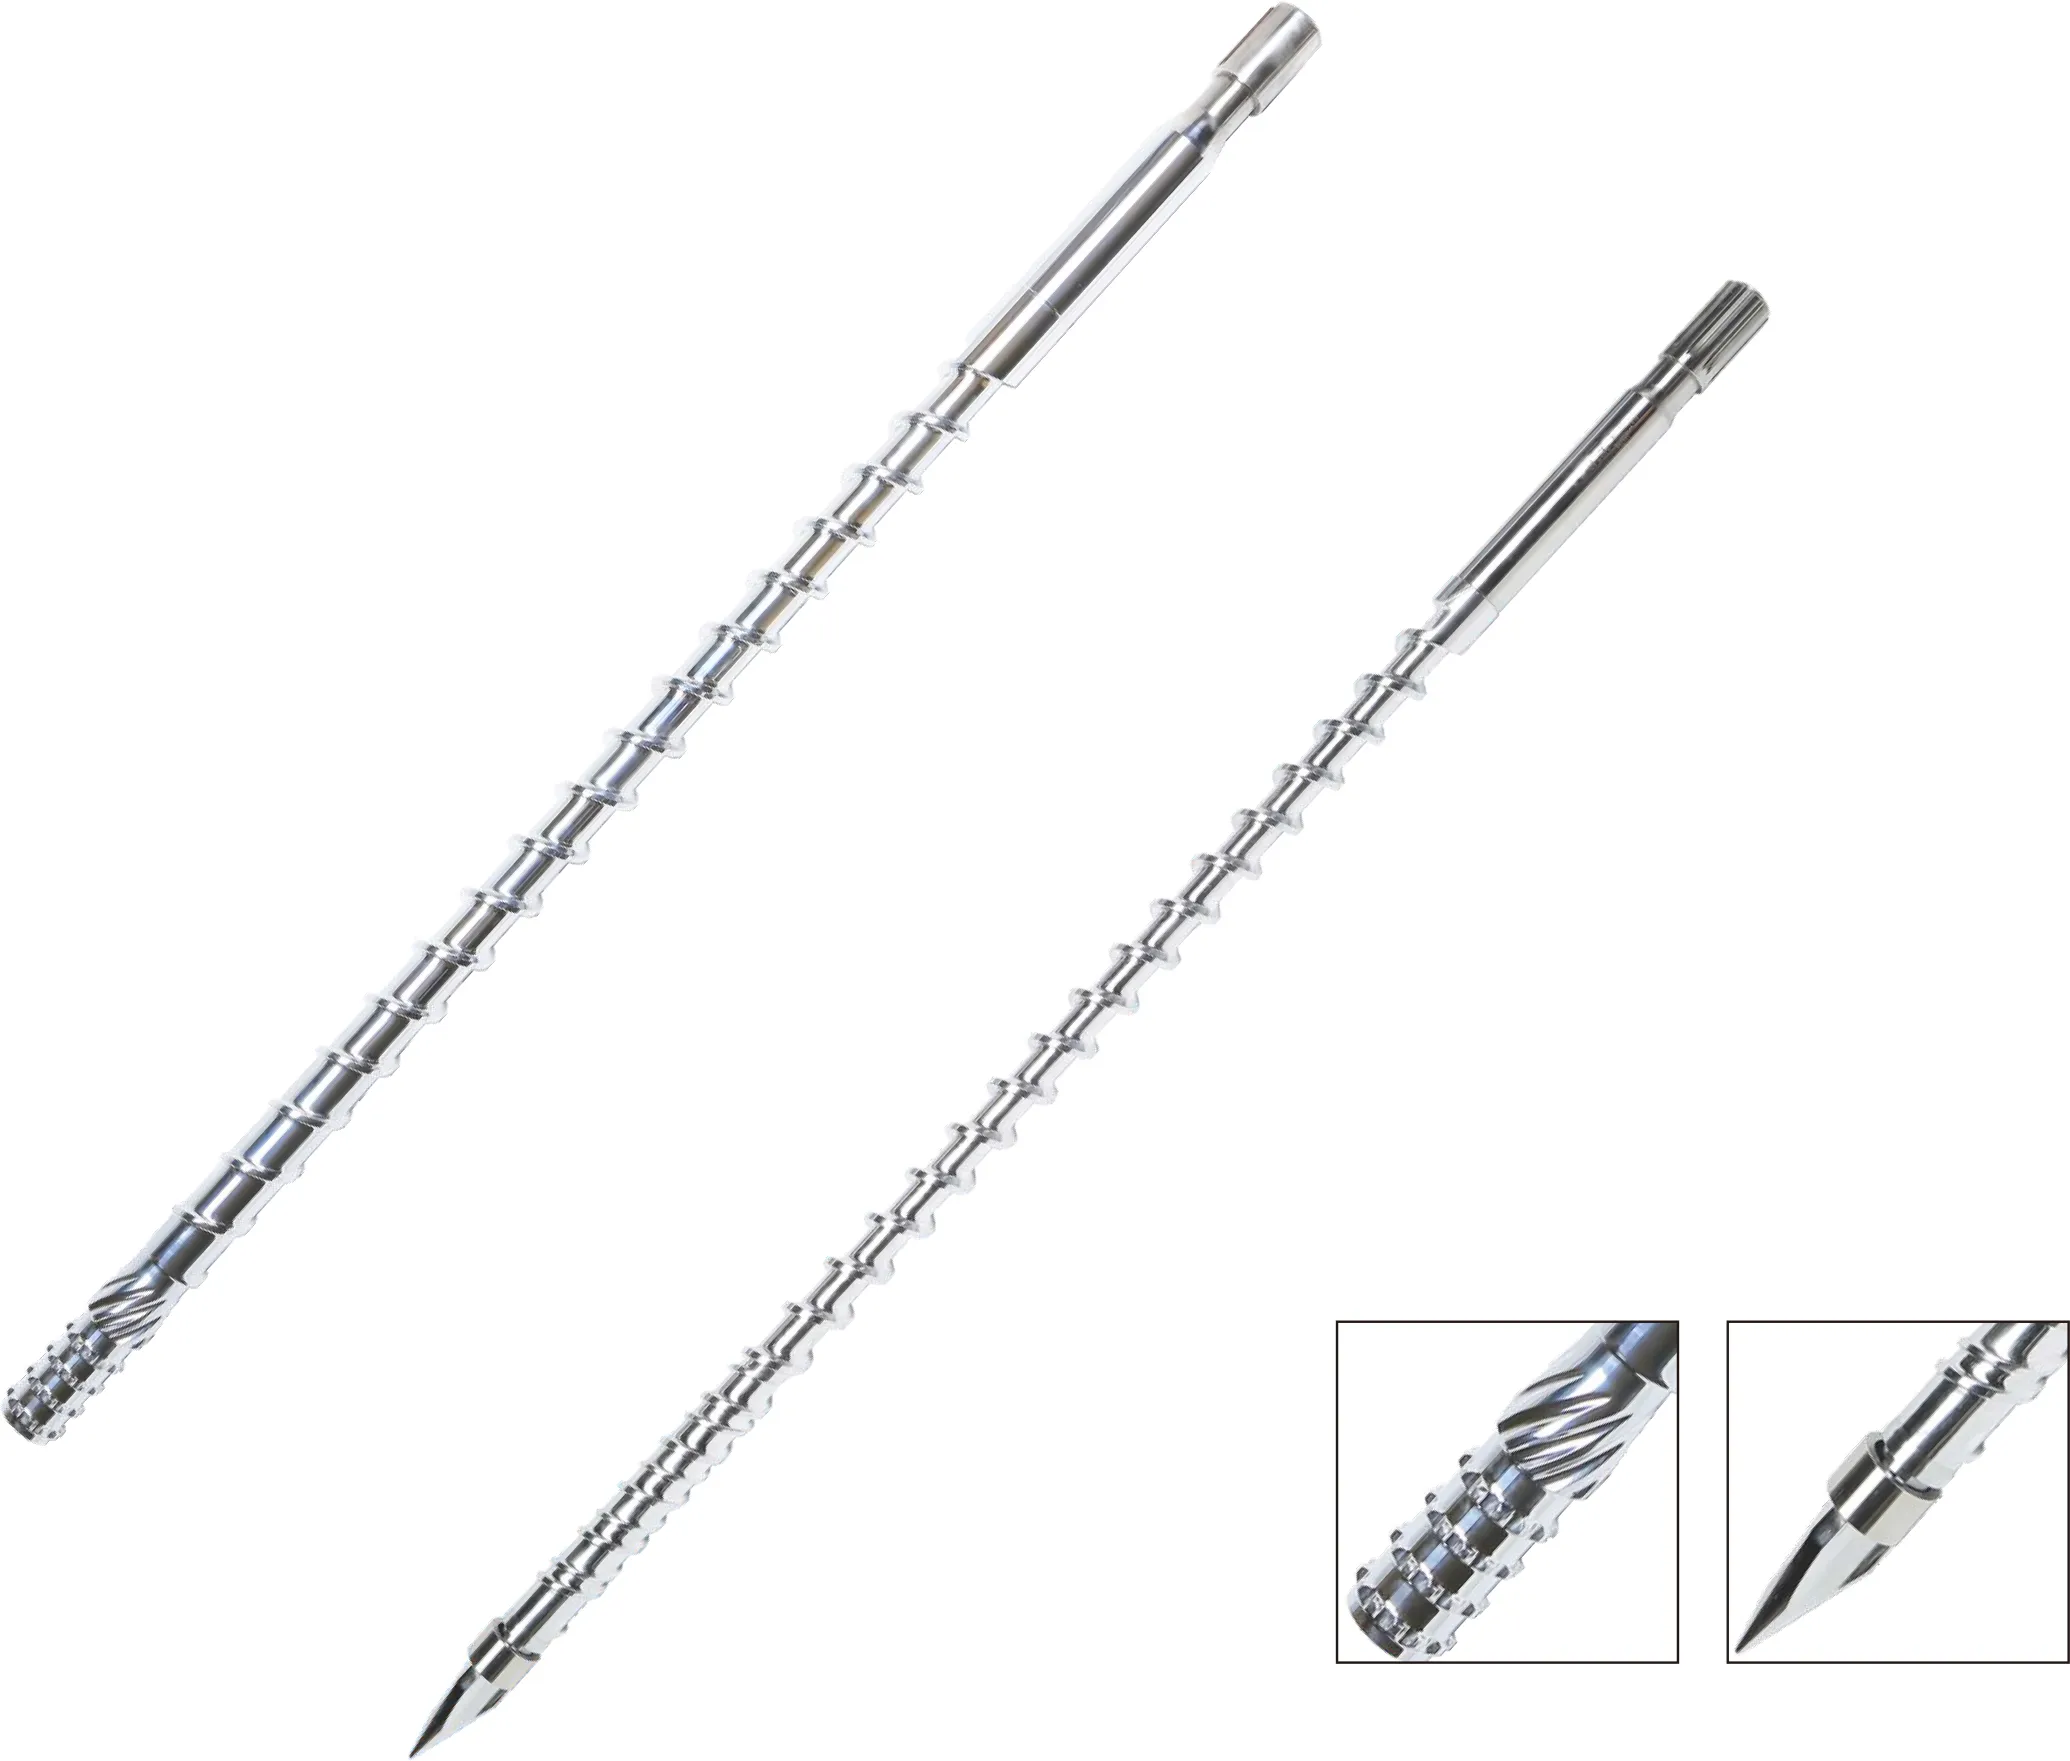 Special thick electroplating screw